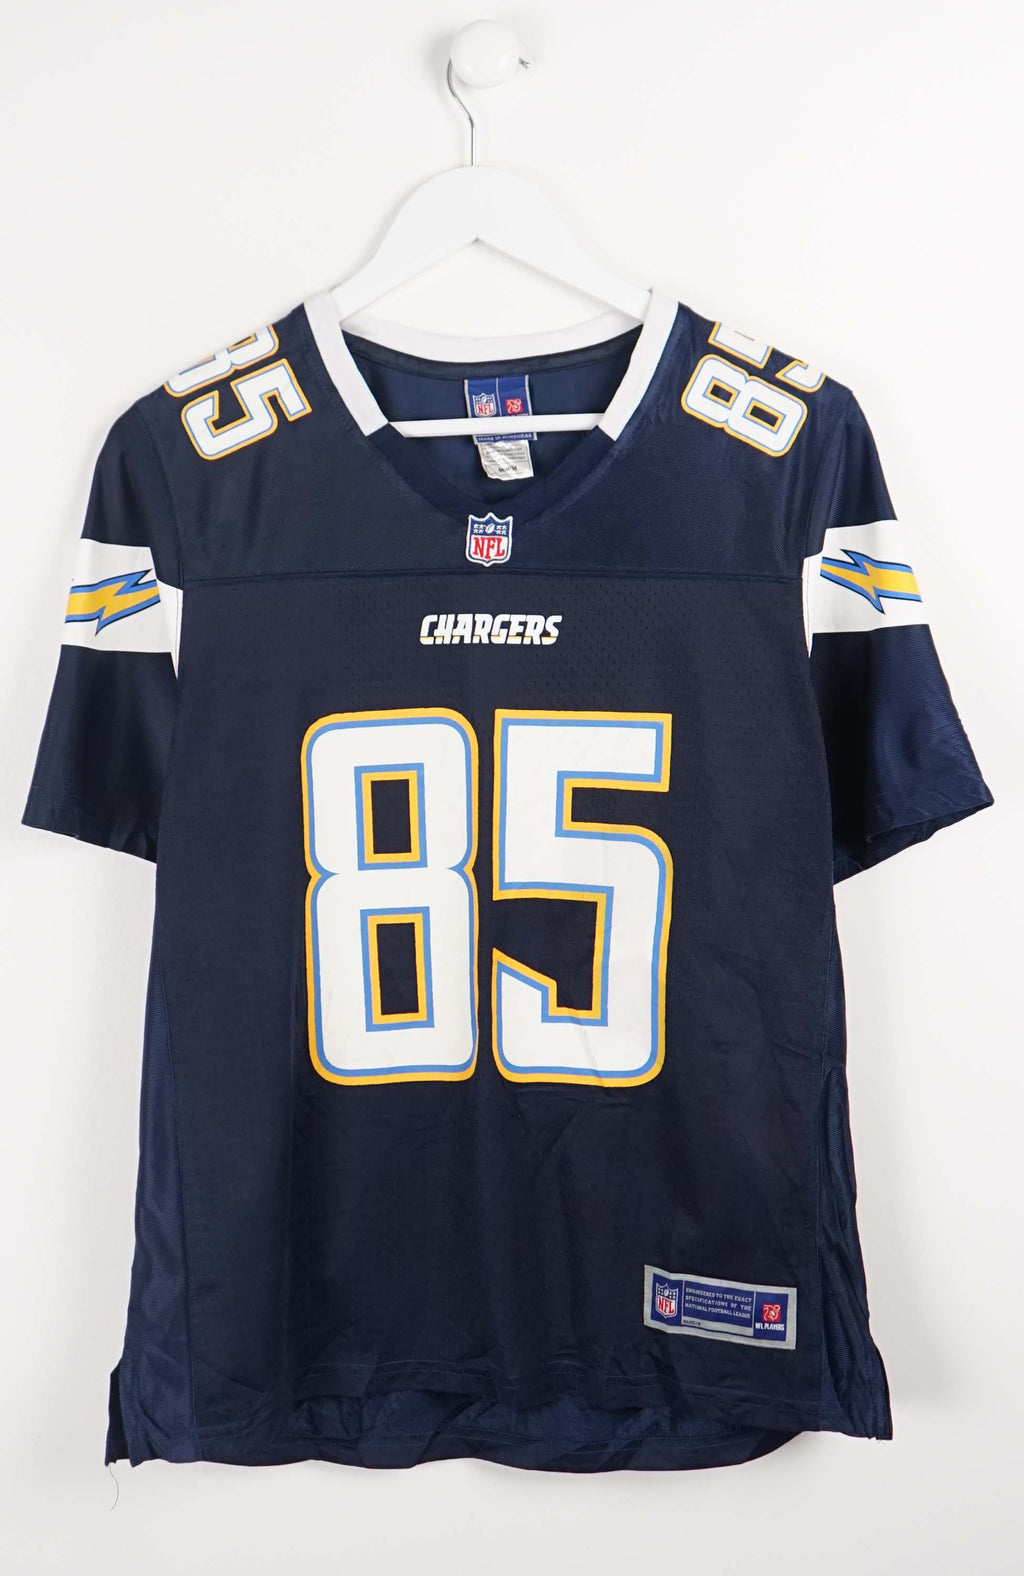 VINTAGE NFL CHARGERS JERSEY (S)